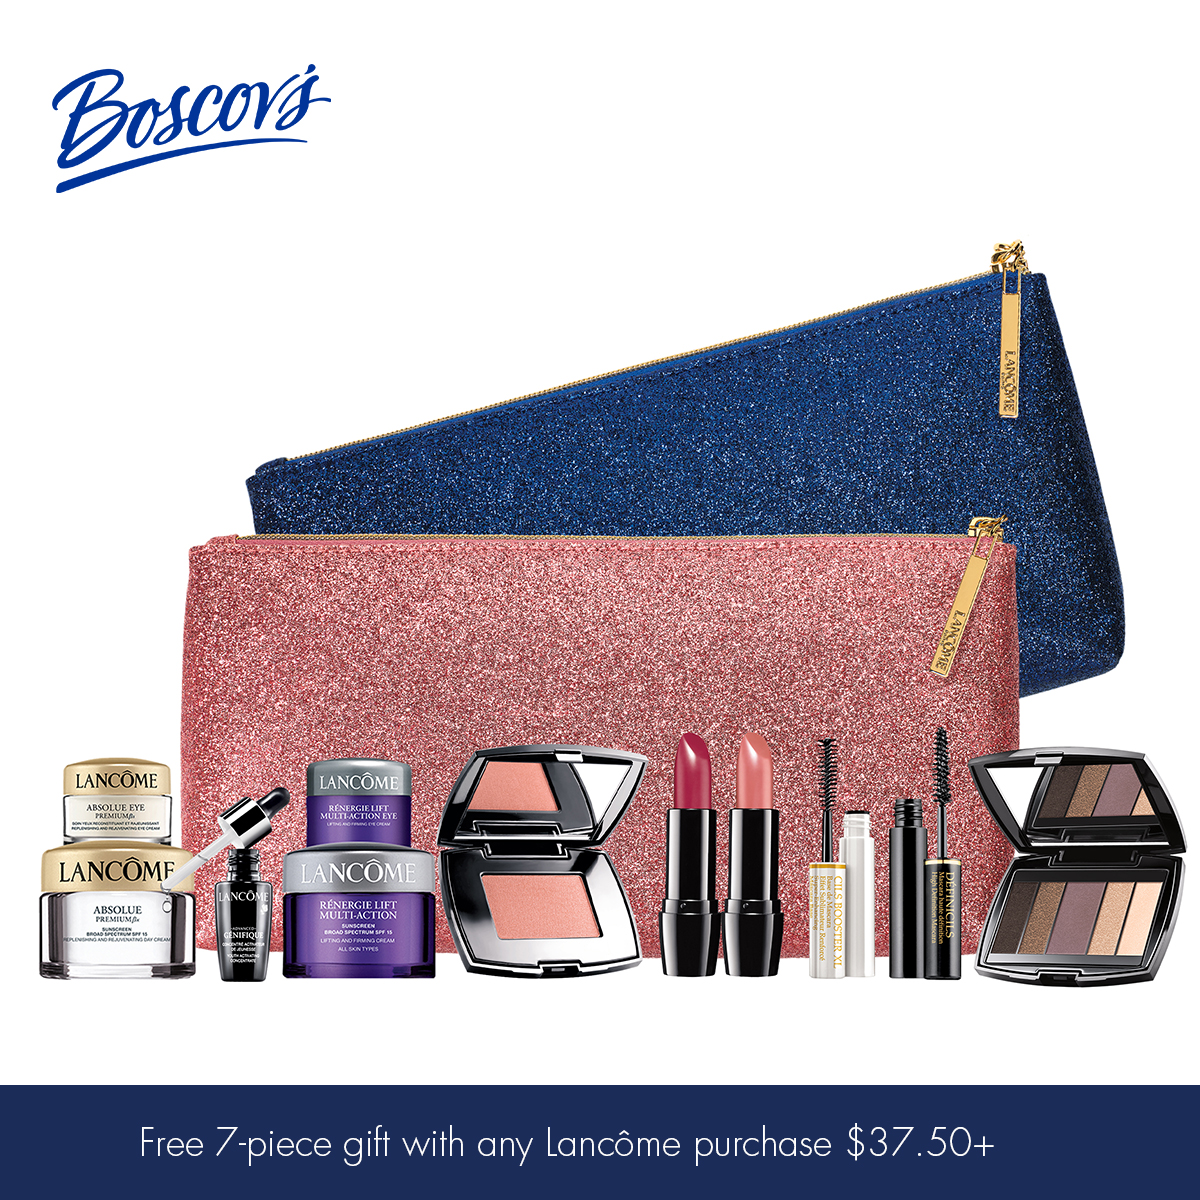 Lancome gift with purchase dillards